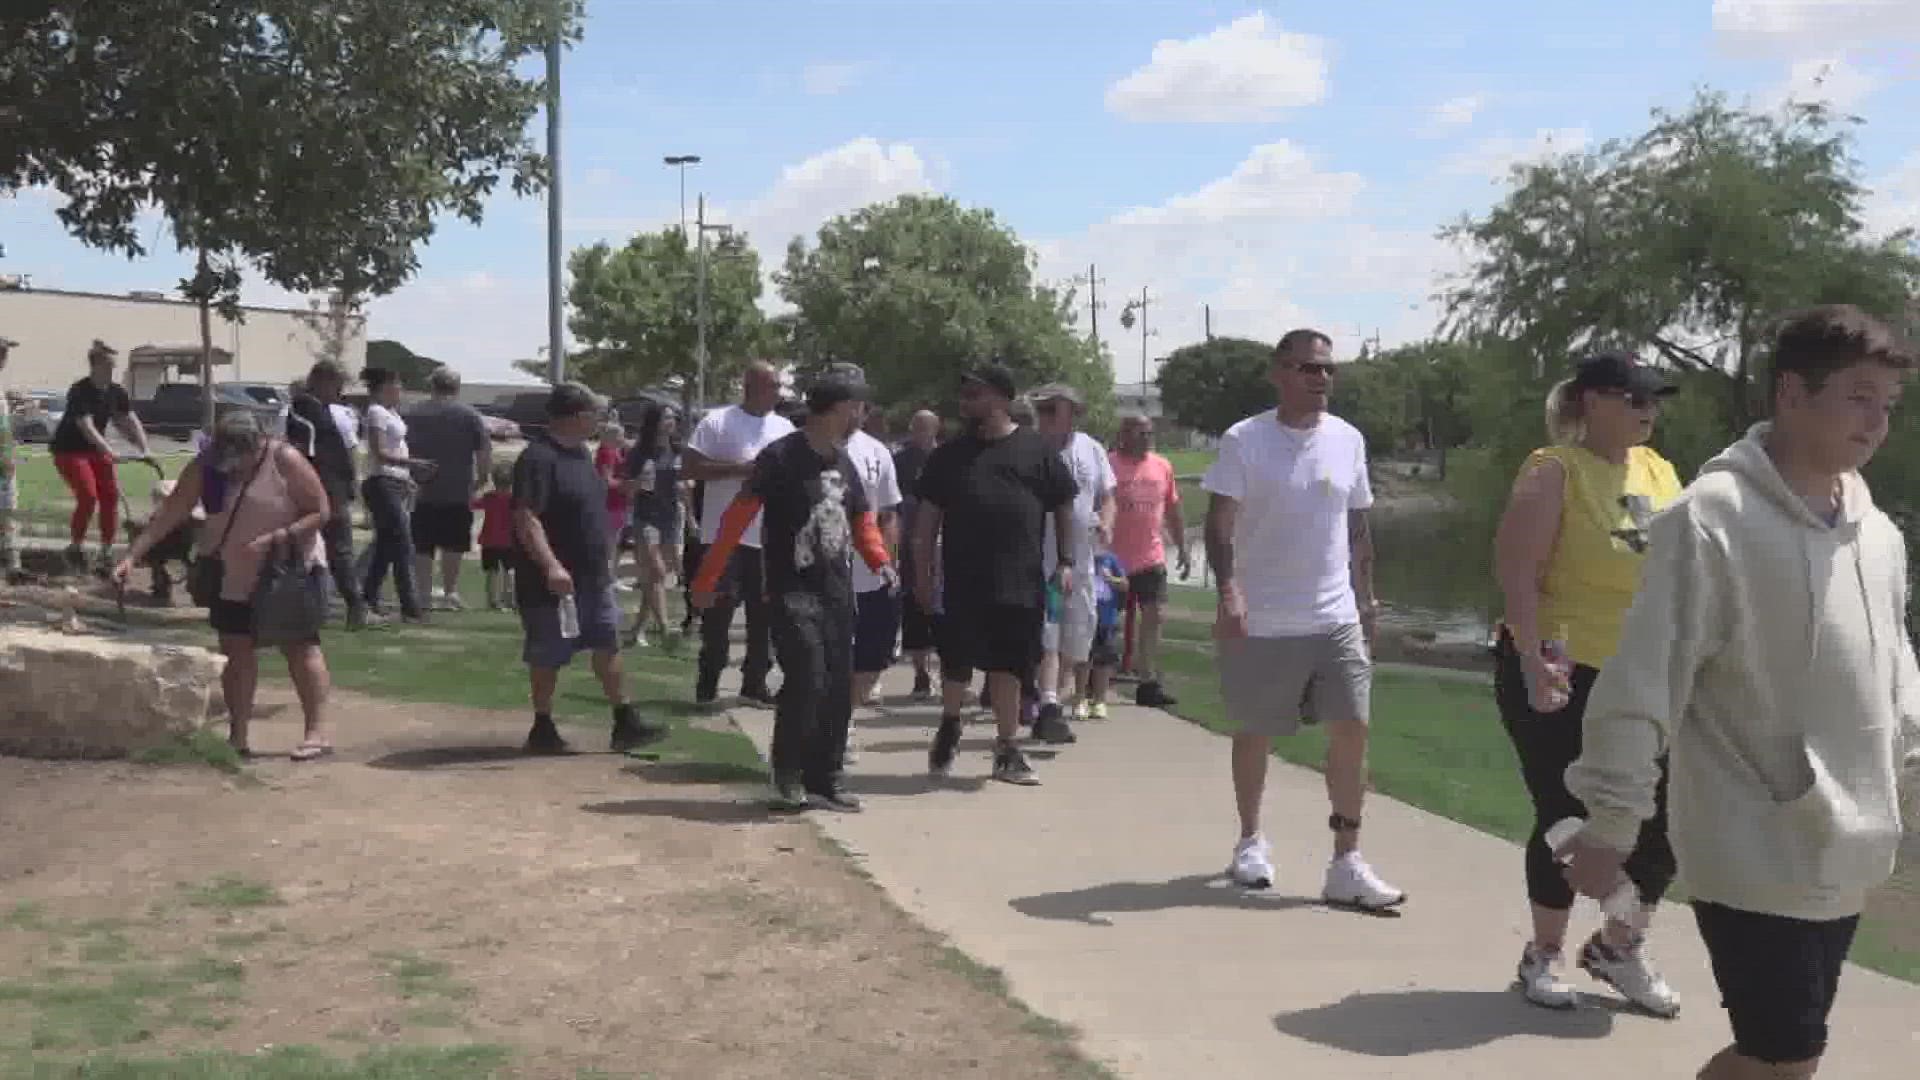 The non-profit had a Recovery Walk in support of those recovering from substance abuse.